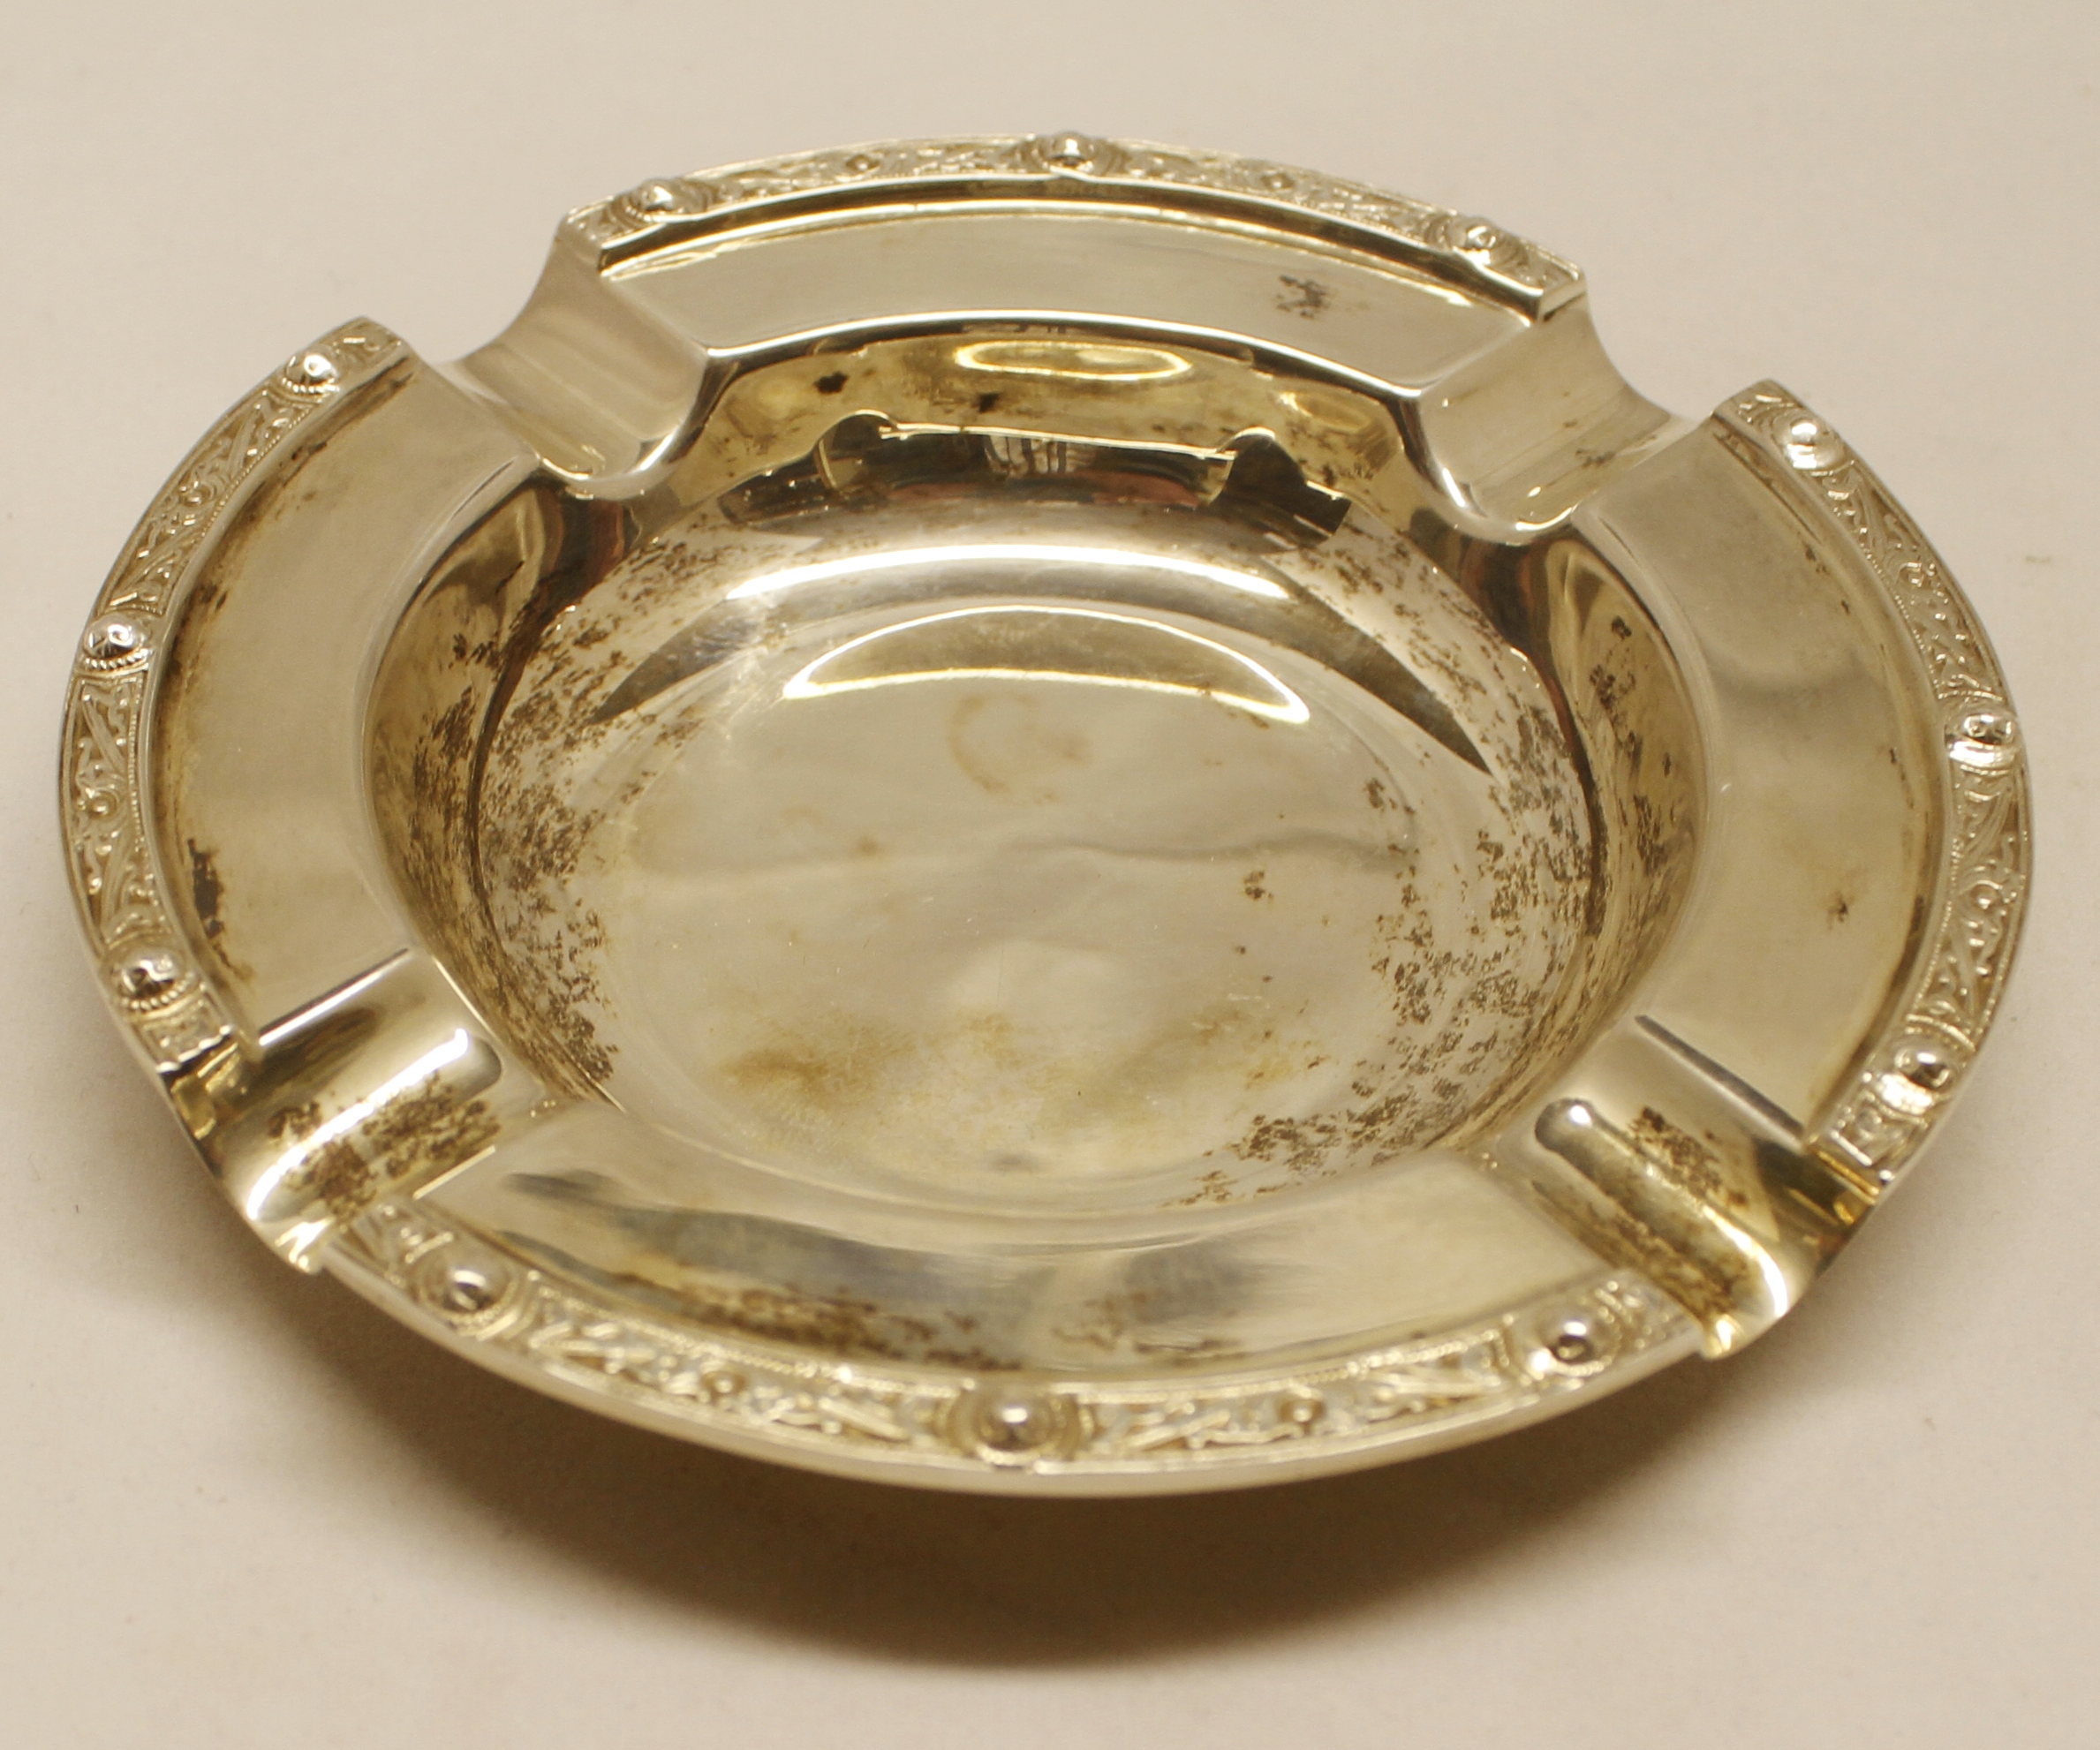 Elizabeth II circular ashtray, with cast and applied Celtic border and polished field, diameter 4